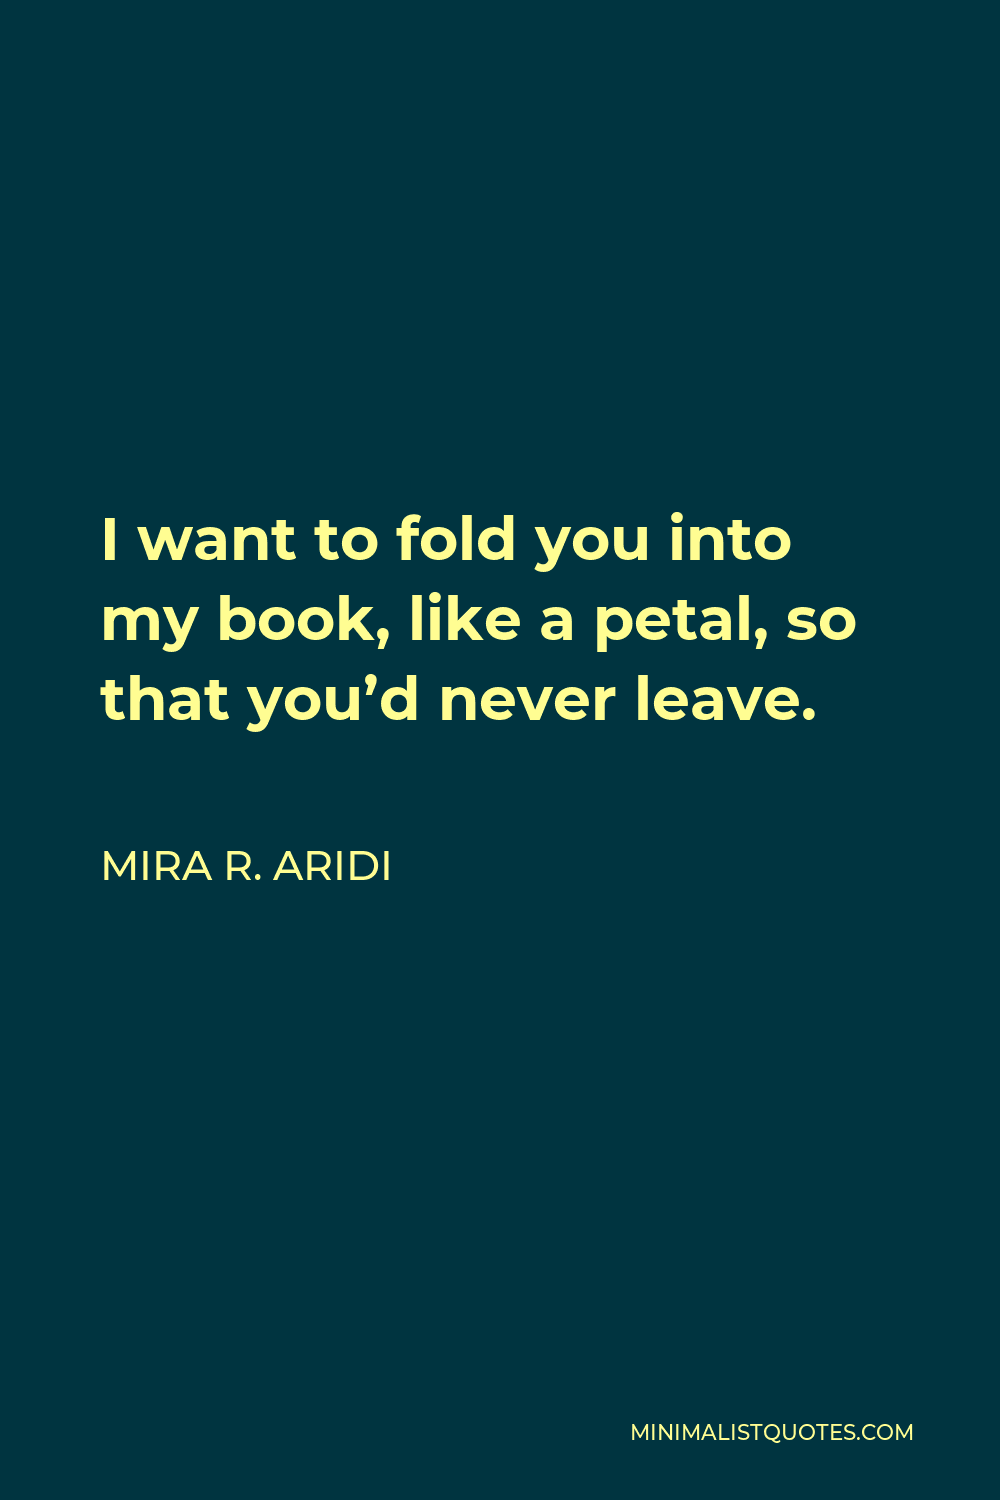 Mira R. Aridi Quote - I want to fold you into my book, like a petal, so that you’d never leave.